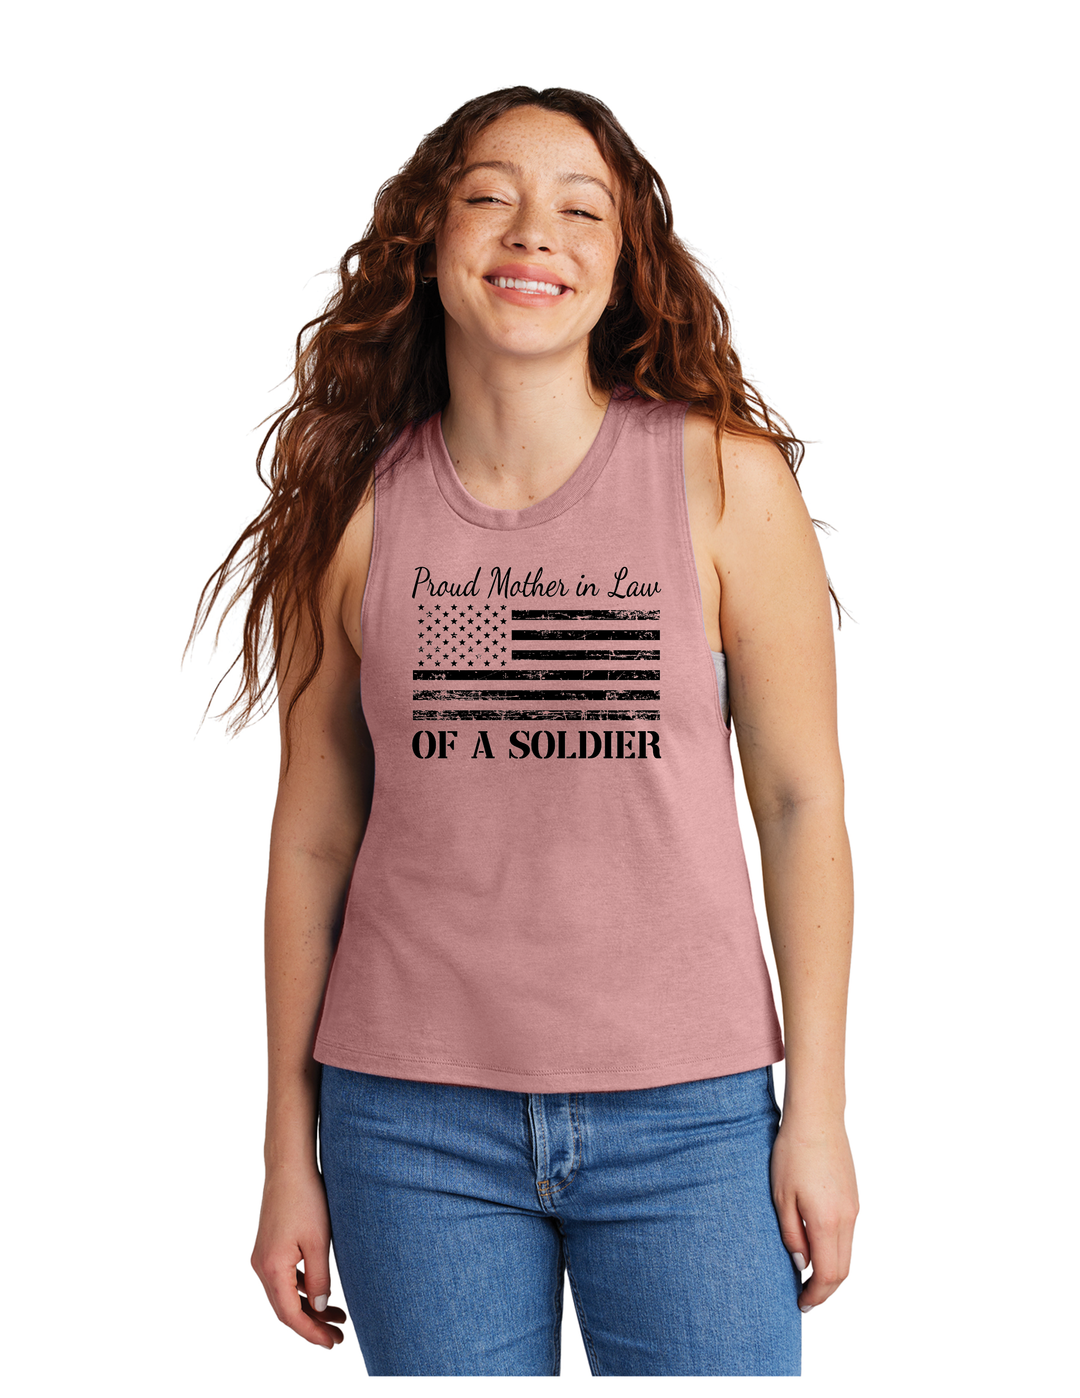 Proud Mother-in-law of a Soldier Muscle Tank (Pink)